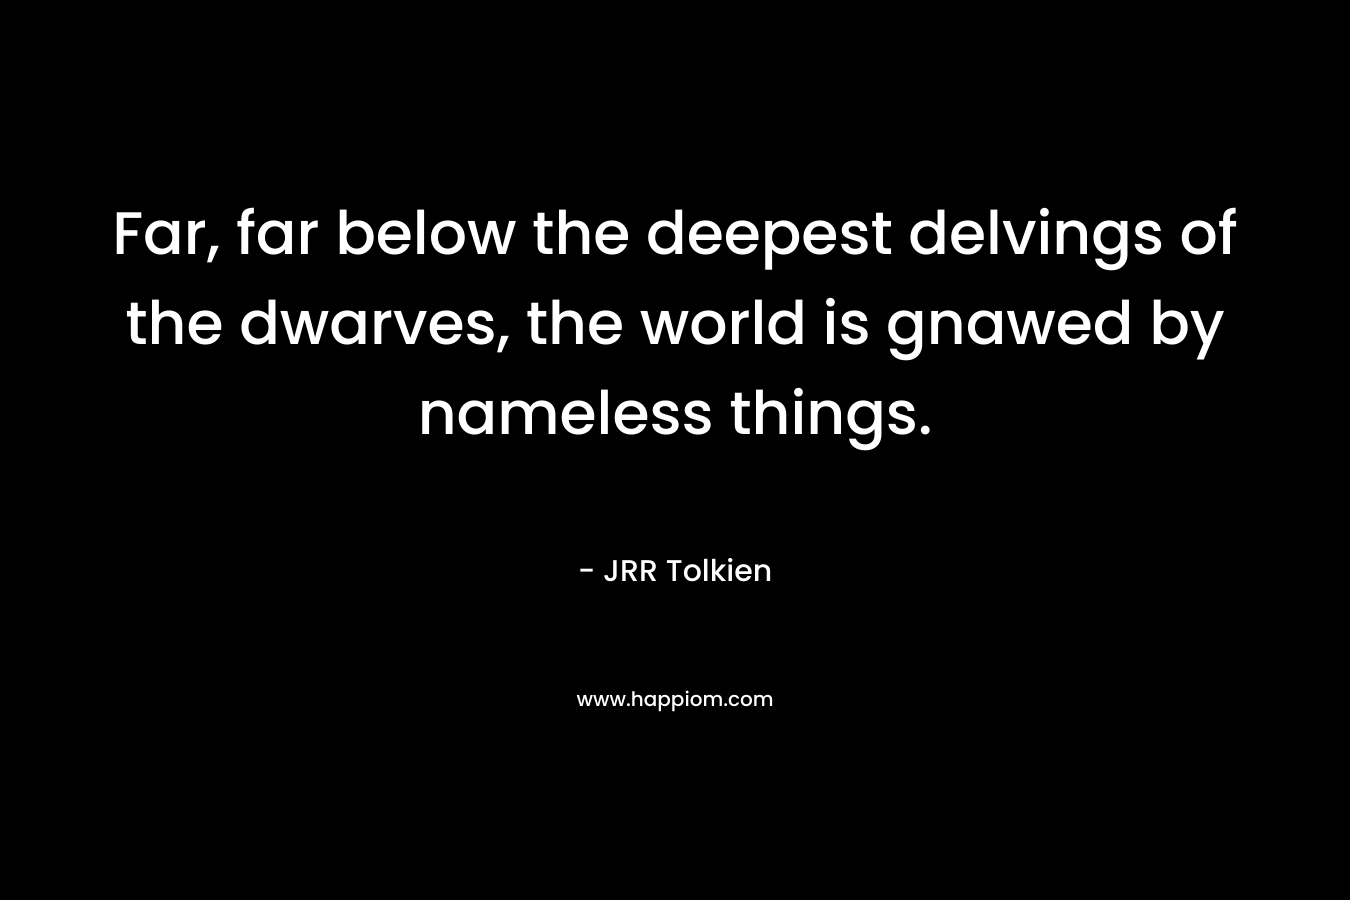 Far, far below the deepest delvings of the dwarves, the world is gnawed by nameless things.